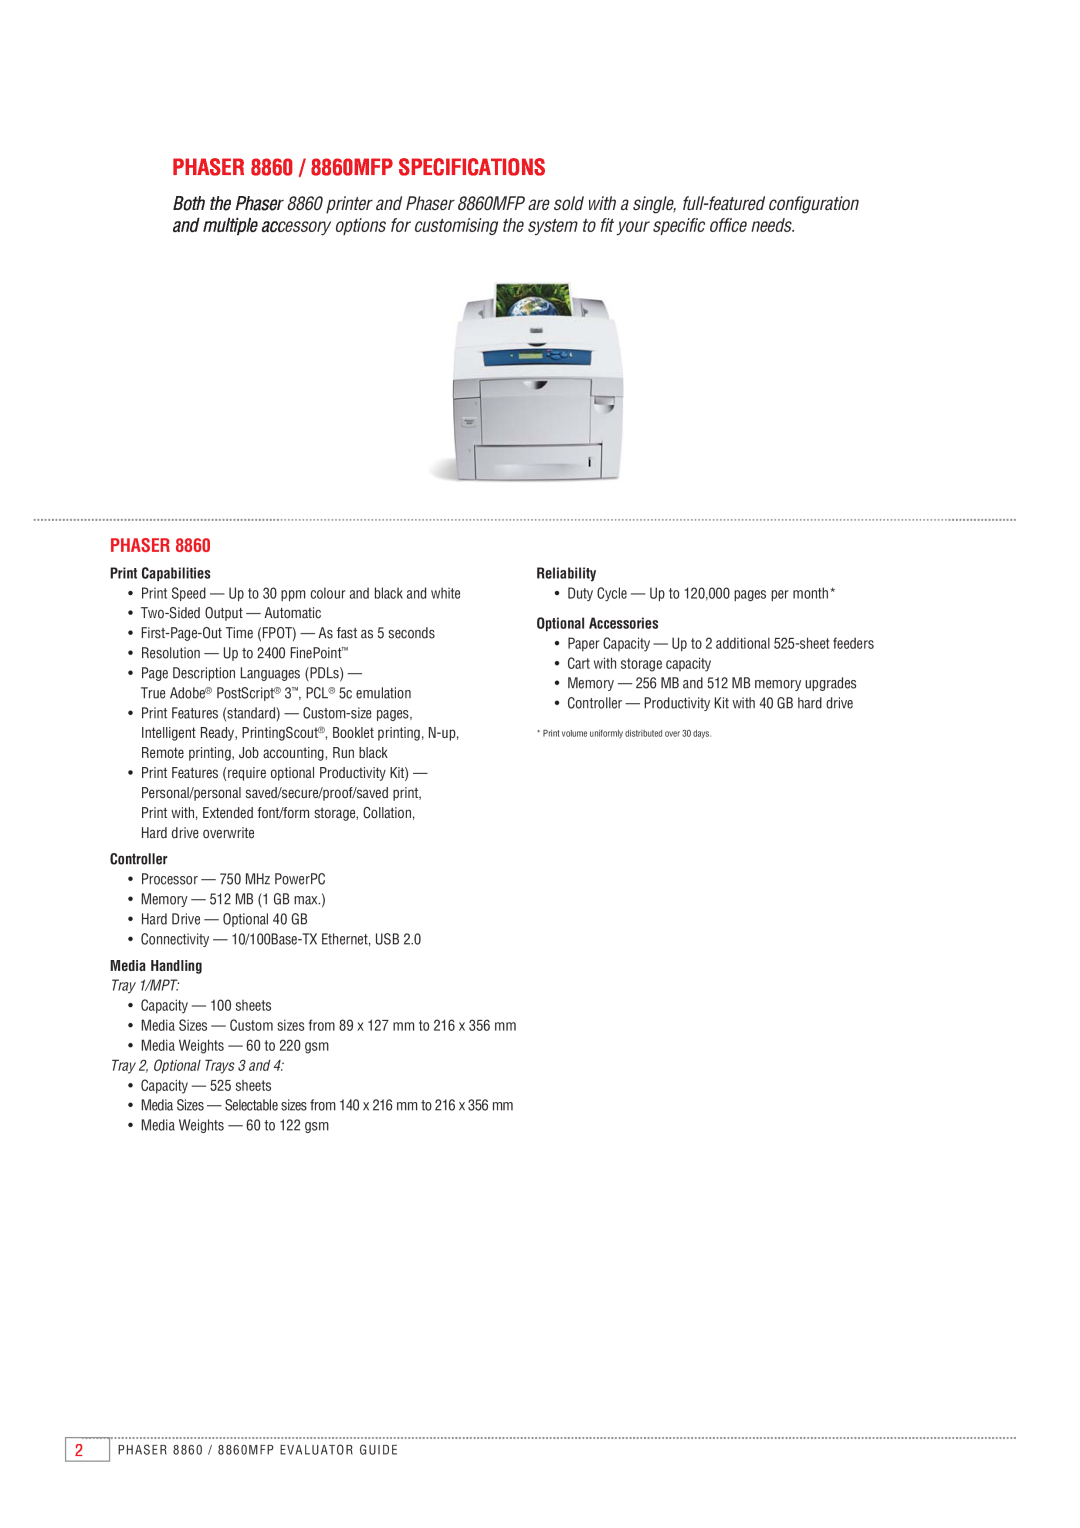 Xerox manual PHASER 8860 / 8860MFP SPECIFICATIONS, Phaser, Print Capabilities, Controller, Media Handling, Tray 1/MPT 